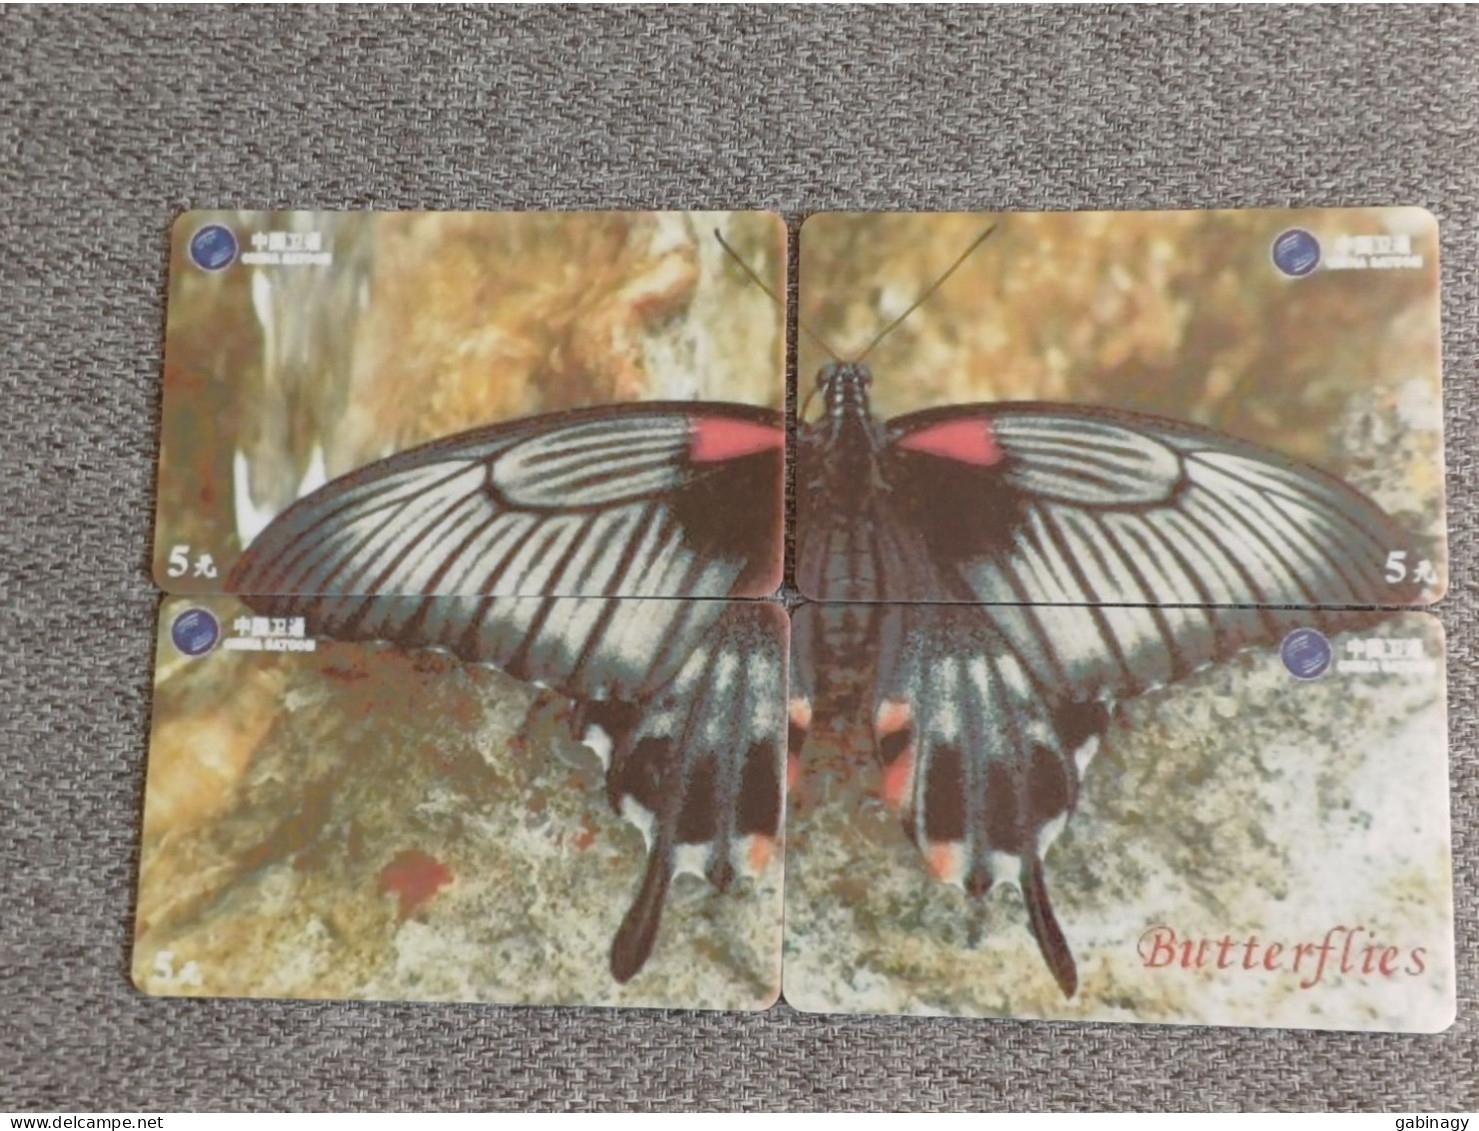 CHINA - BUTTERFLY-03 - PUZZLE SET OF 4 CARDS - Chine